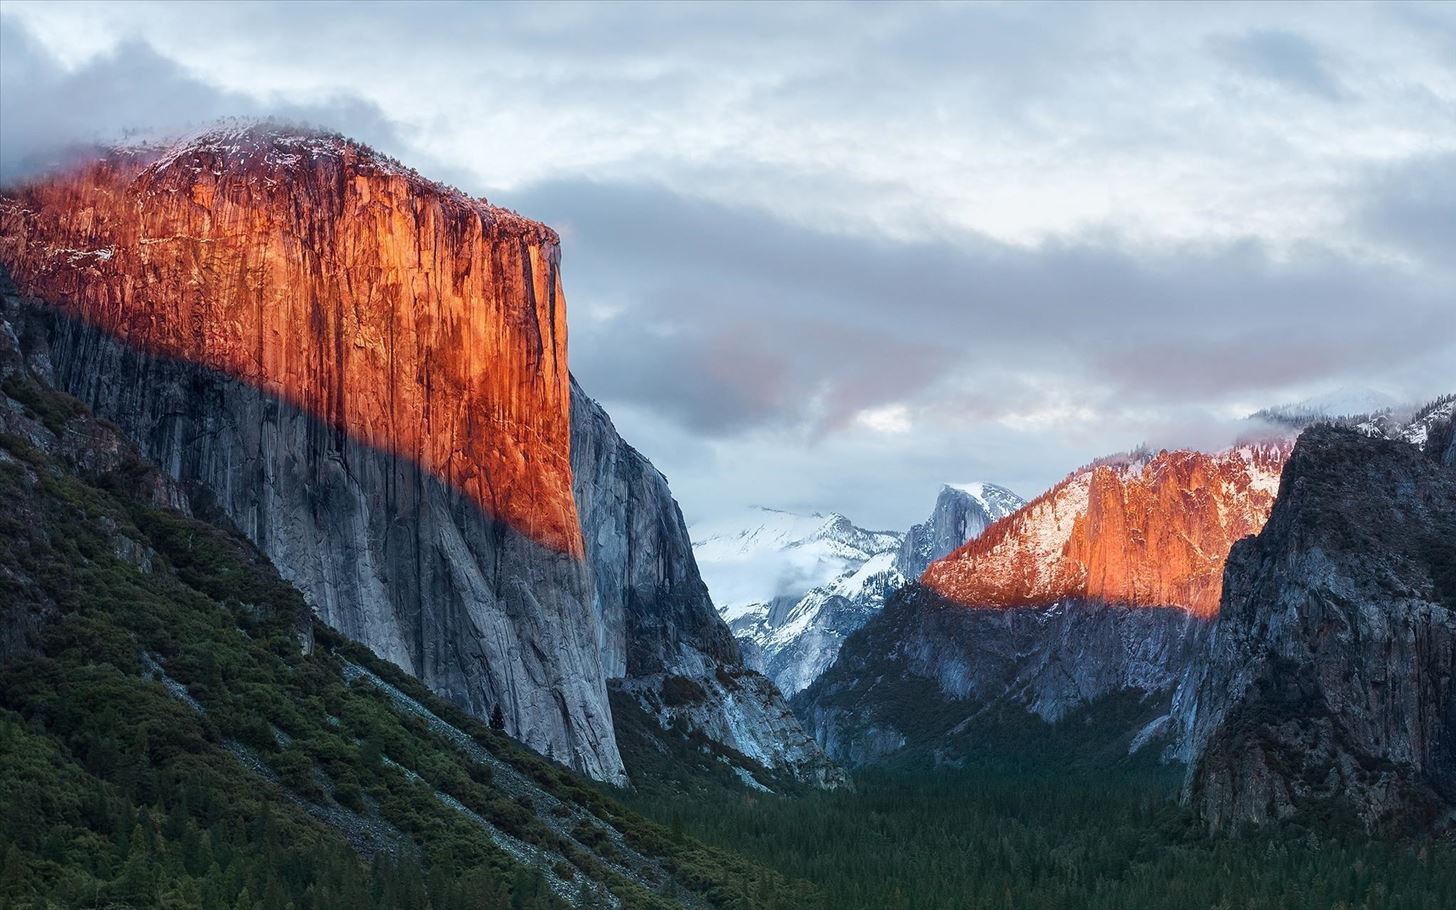 How To Get The Os X El Capitan Ios Wallpaper On Your iPad